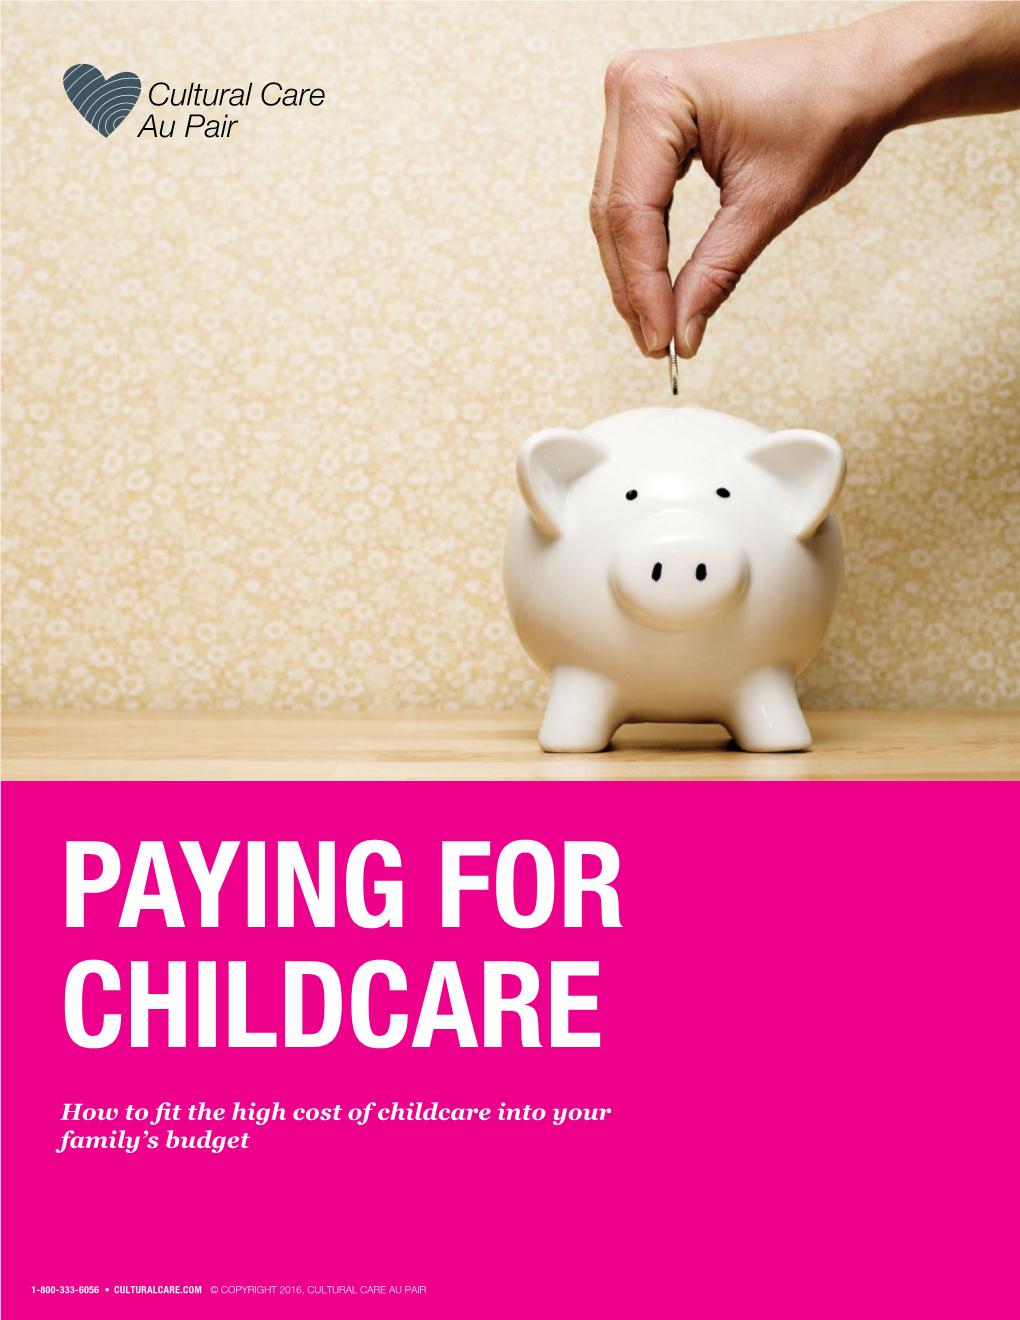 Au Pair Childcare, of Course. It's More Flexible Than Daycare and More